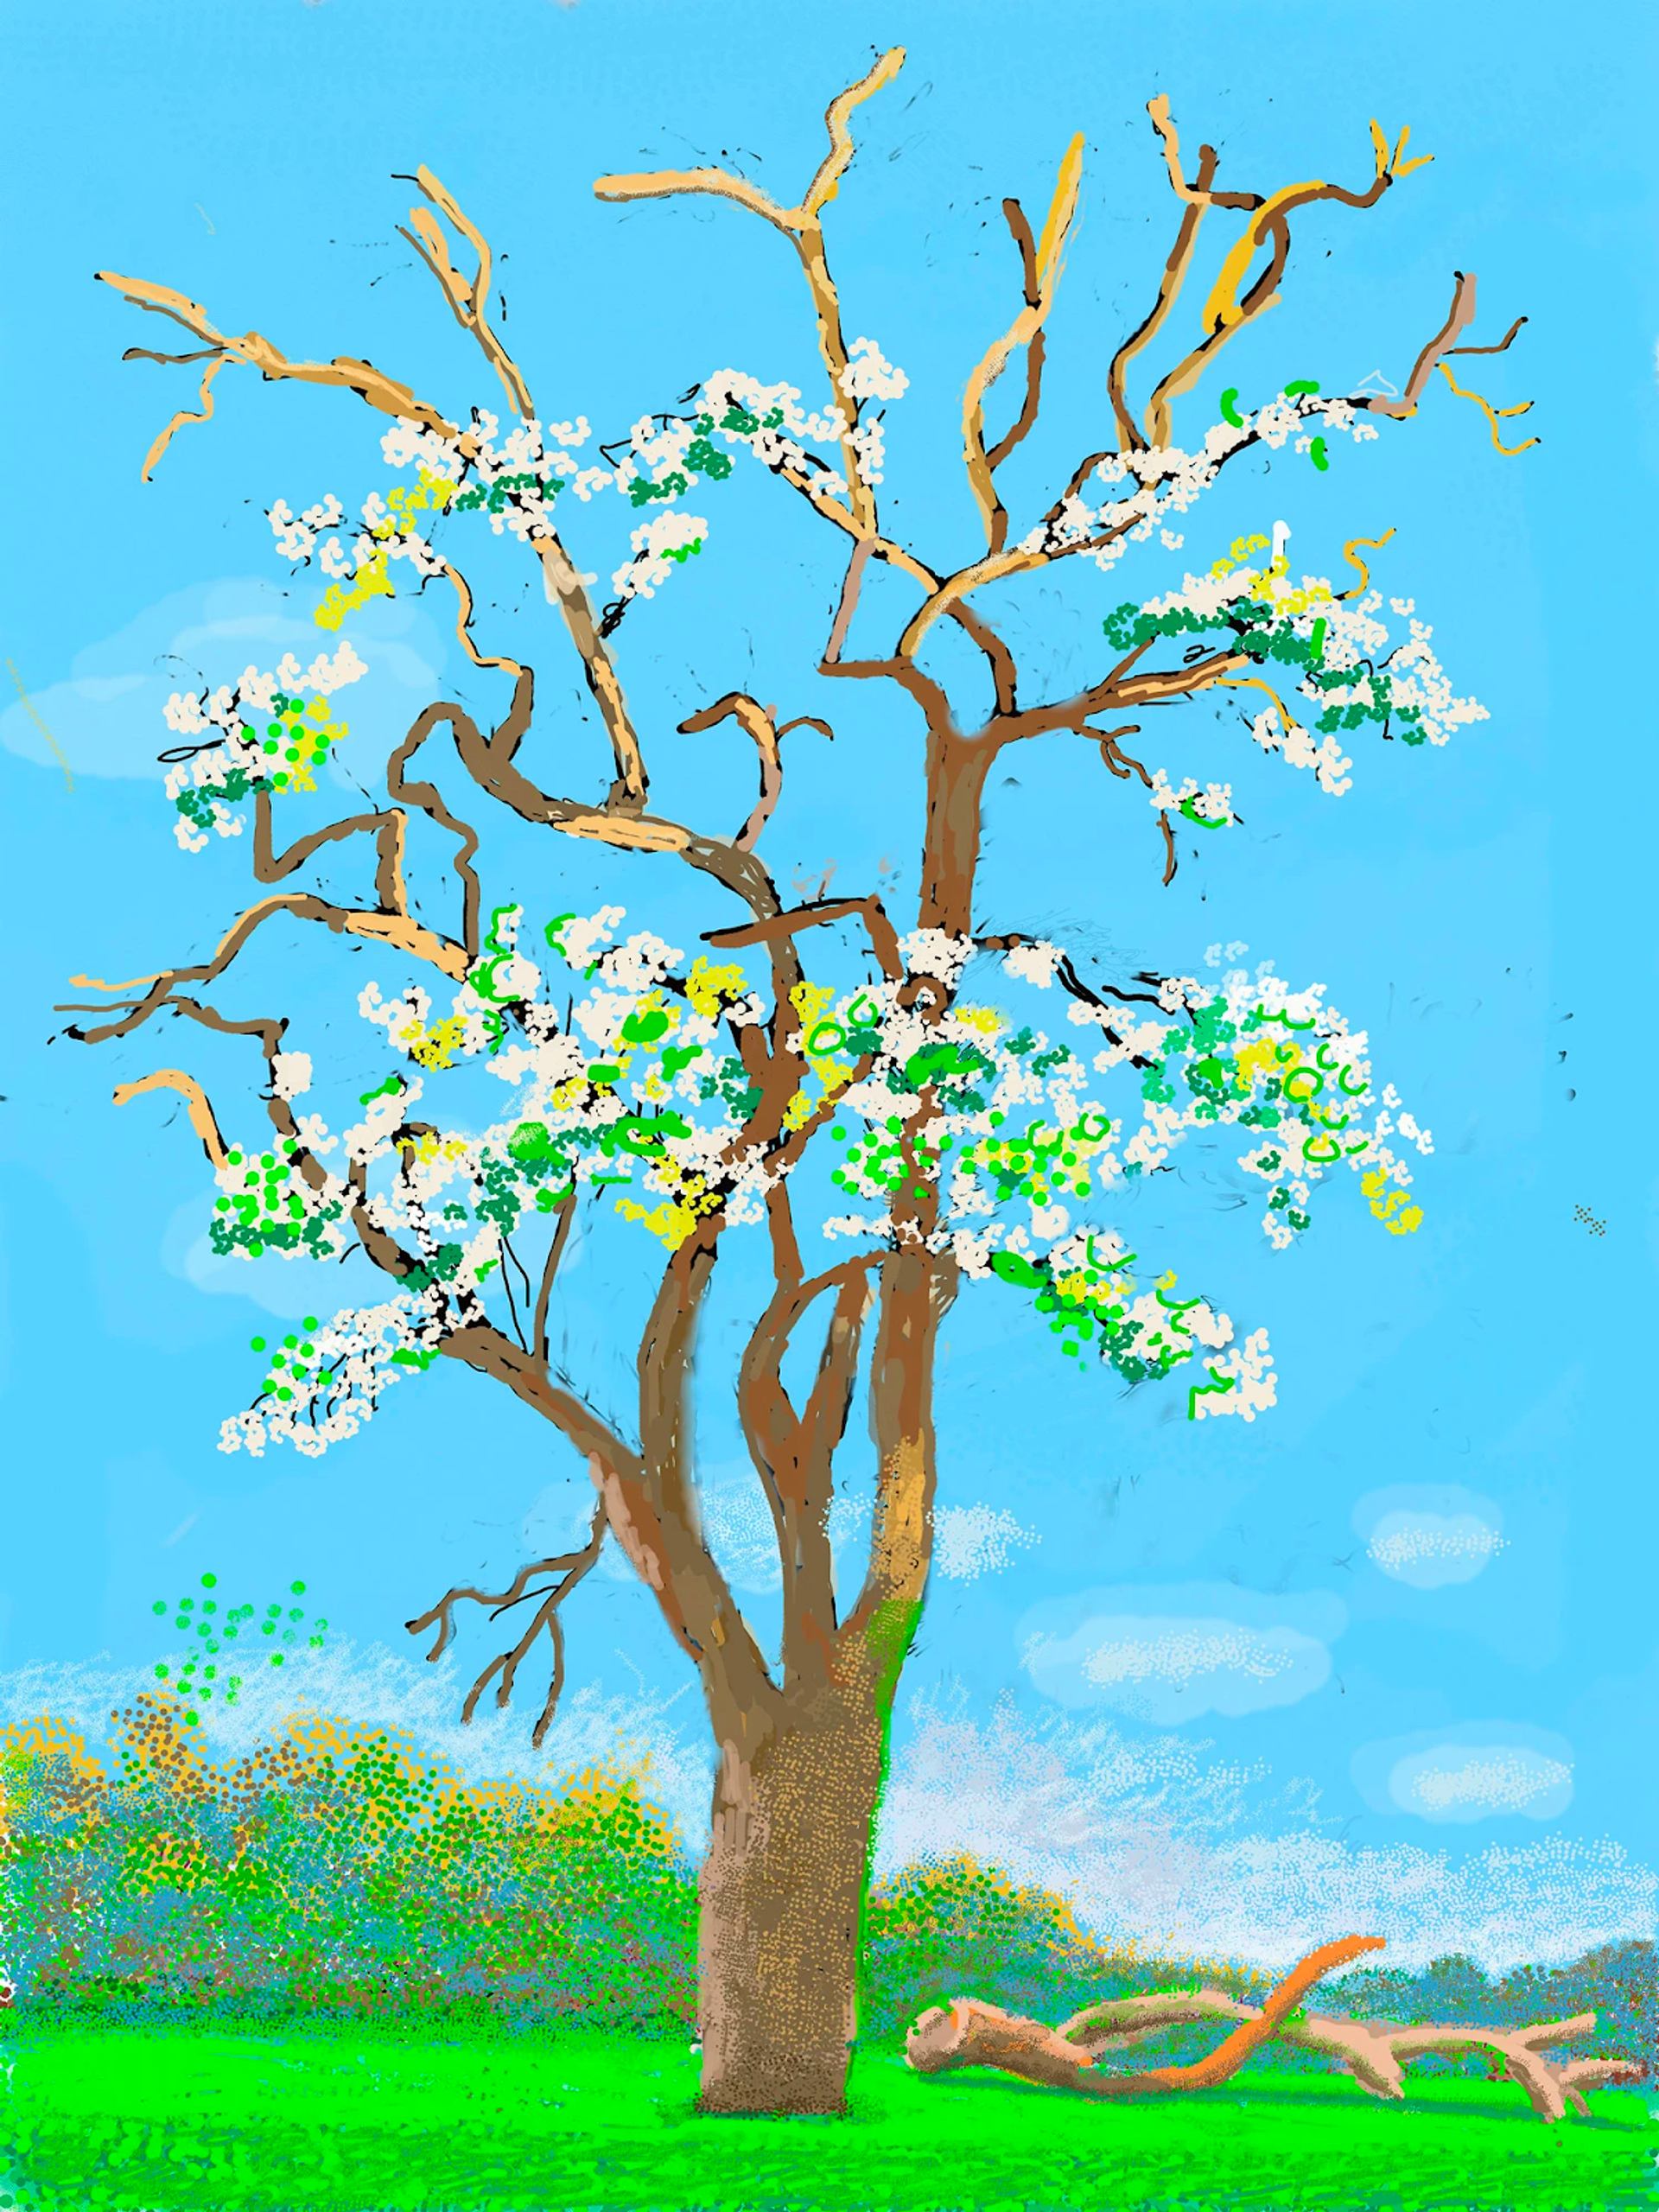 A digital drawing of a tree with white, green and yellow blossoms and many of its branches exposed. One fallen branch lies on the floor next to it.